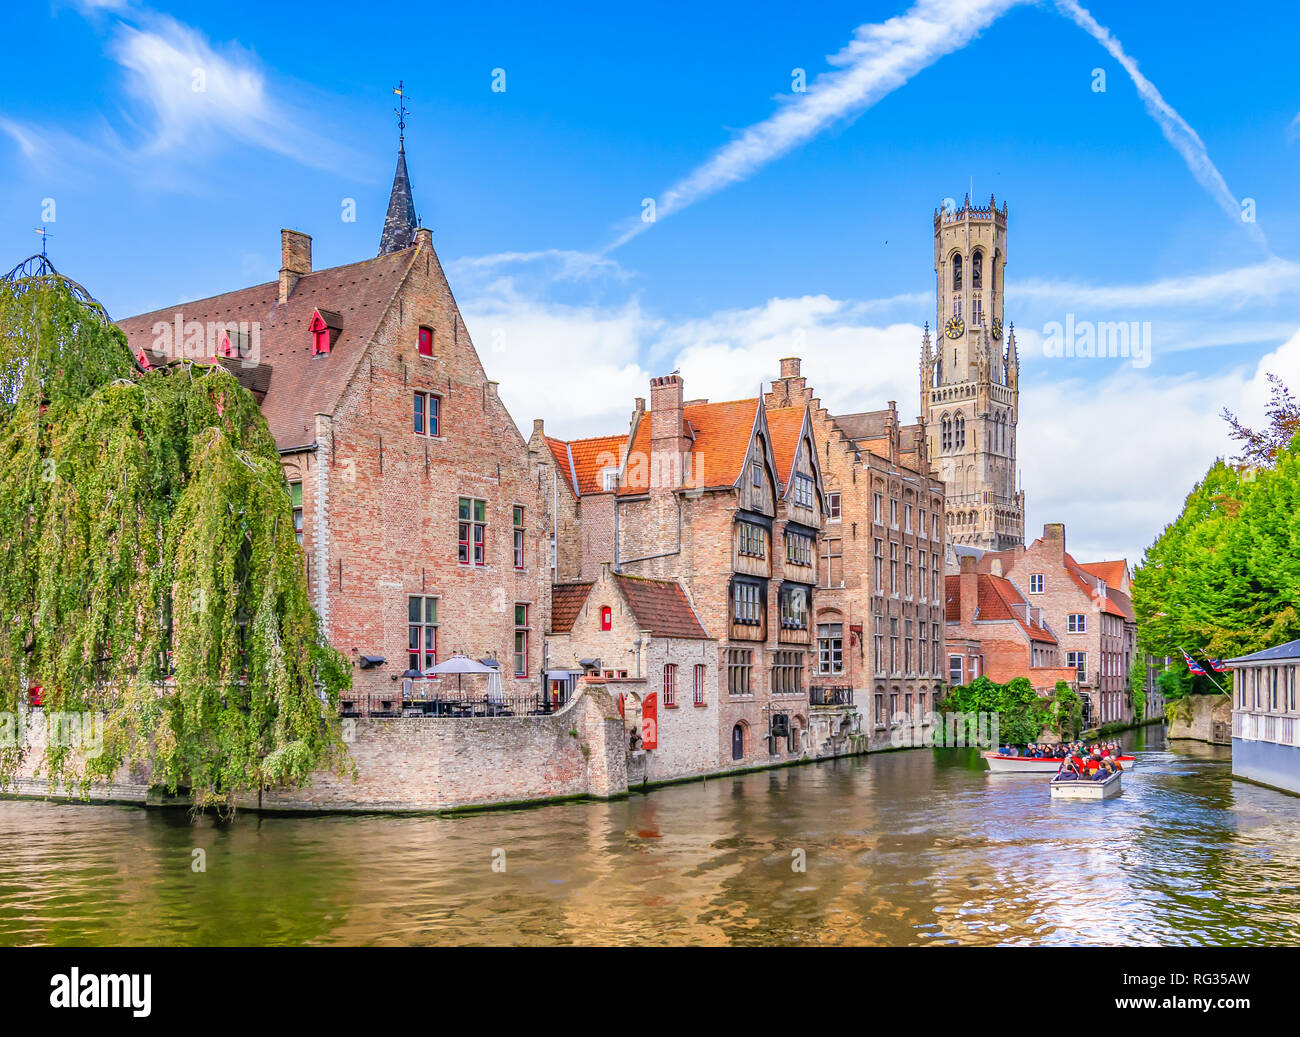 Popular viewpoint  in city center with traditional brick buildings along the canal in Bruges, Belgium Stock Photo